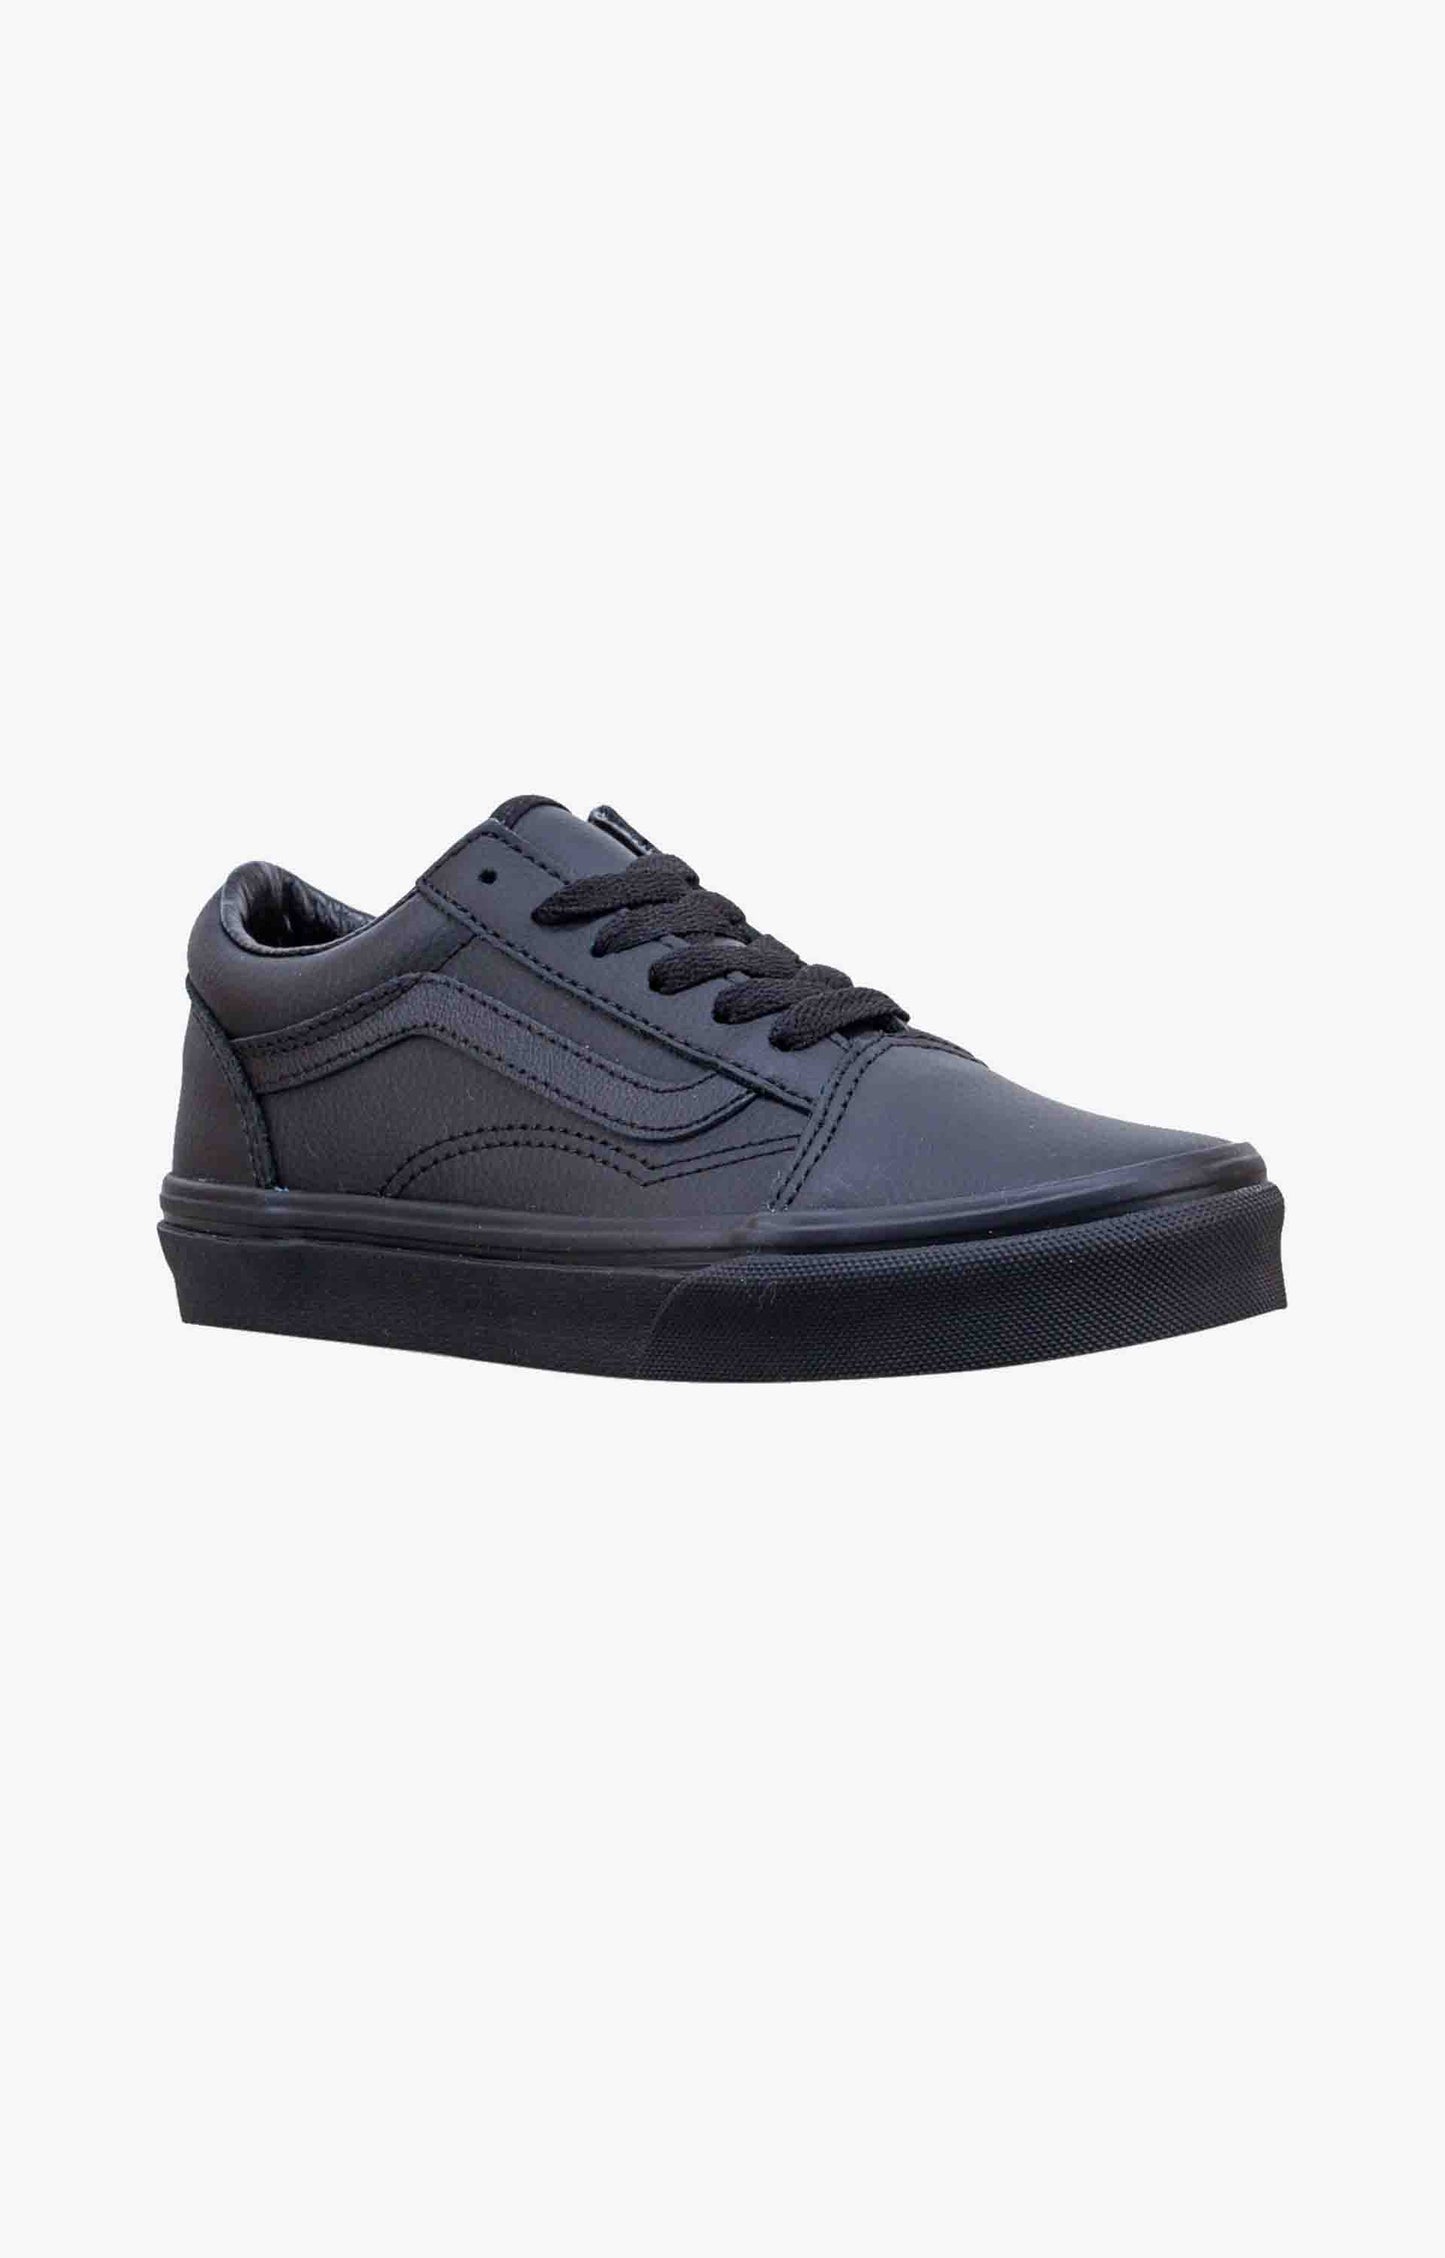 Vans Old Skool Youth Shoes, Black Mono Leather